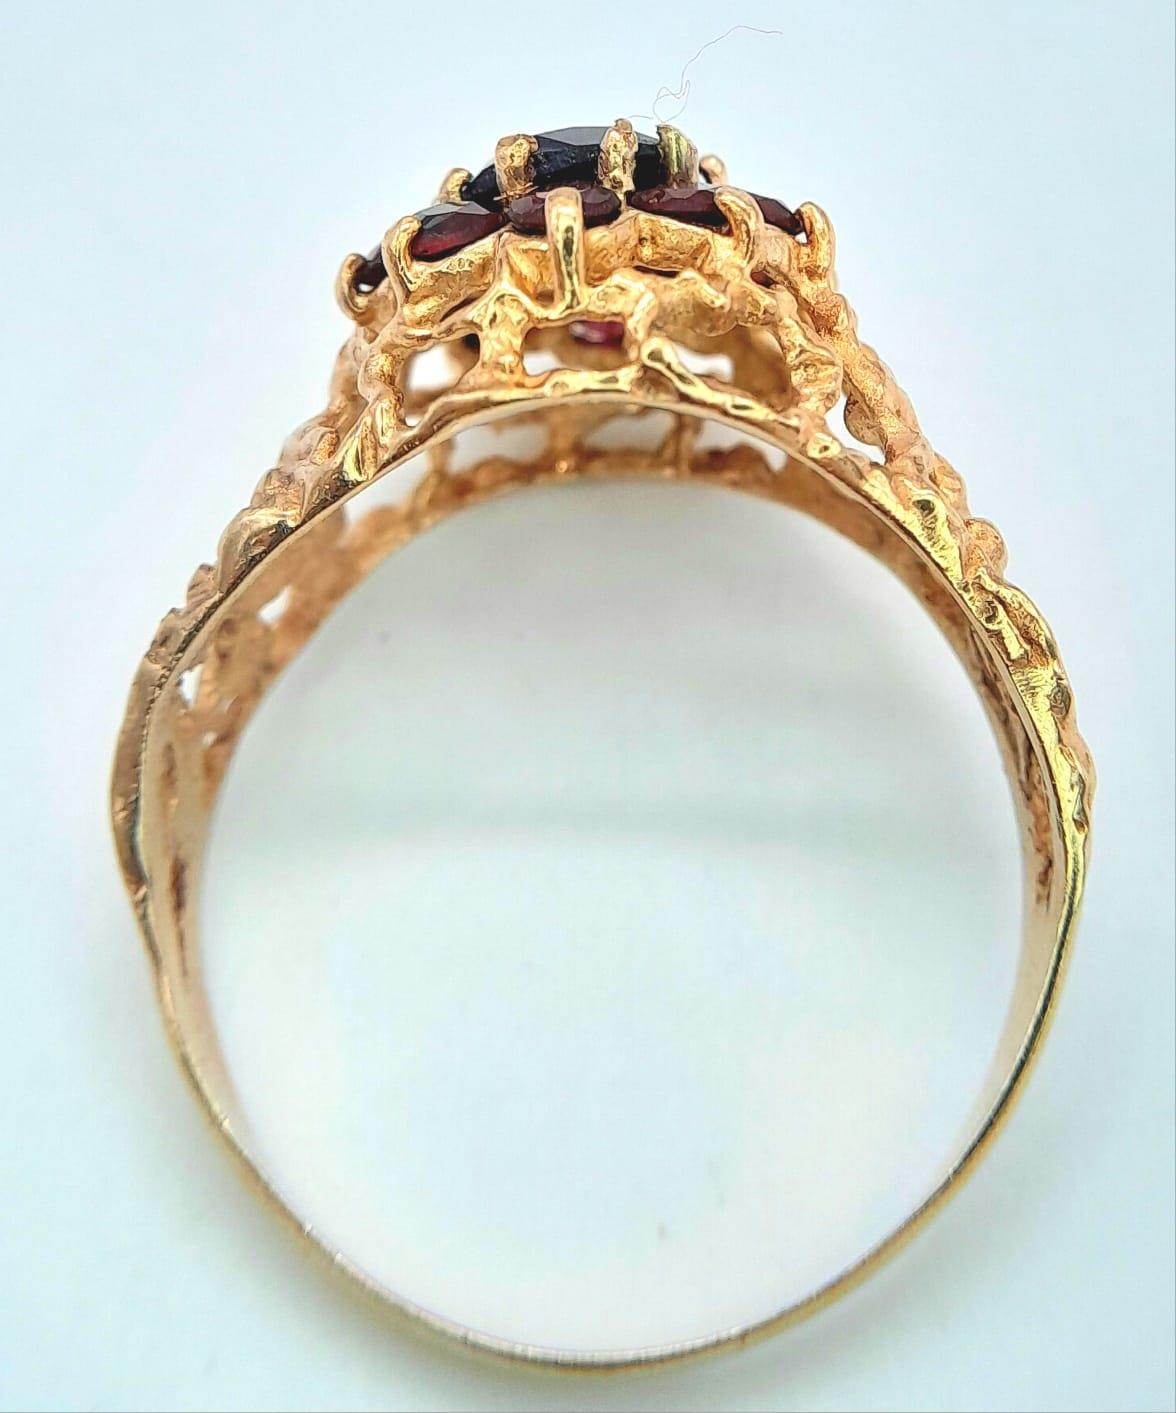 A vintage oval cluster garnet 9ct gold ring surrounded by a halo of bright red garnets in a - Image 5 of 6